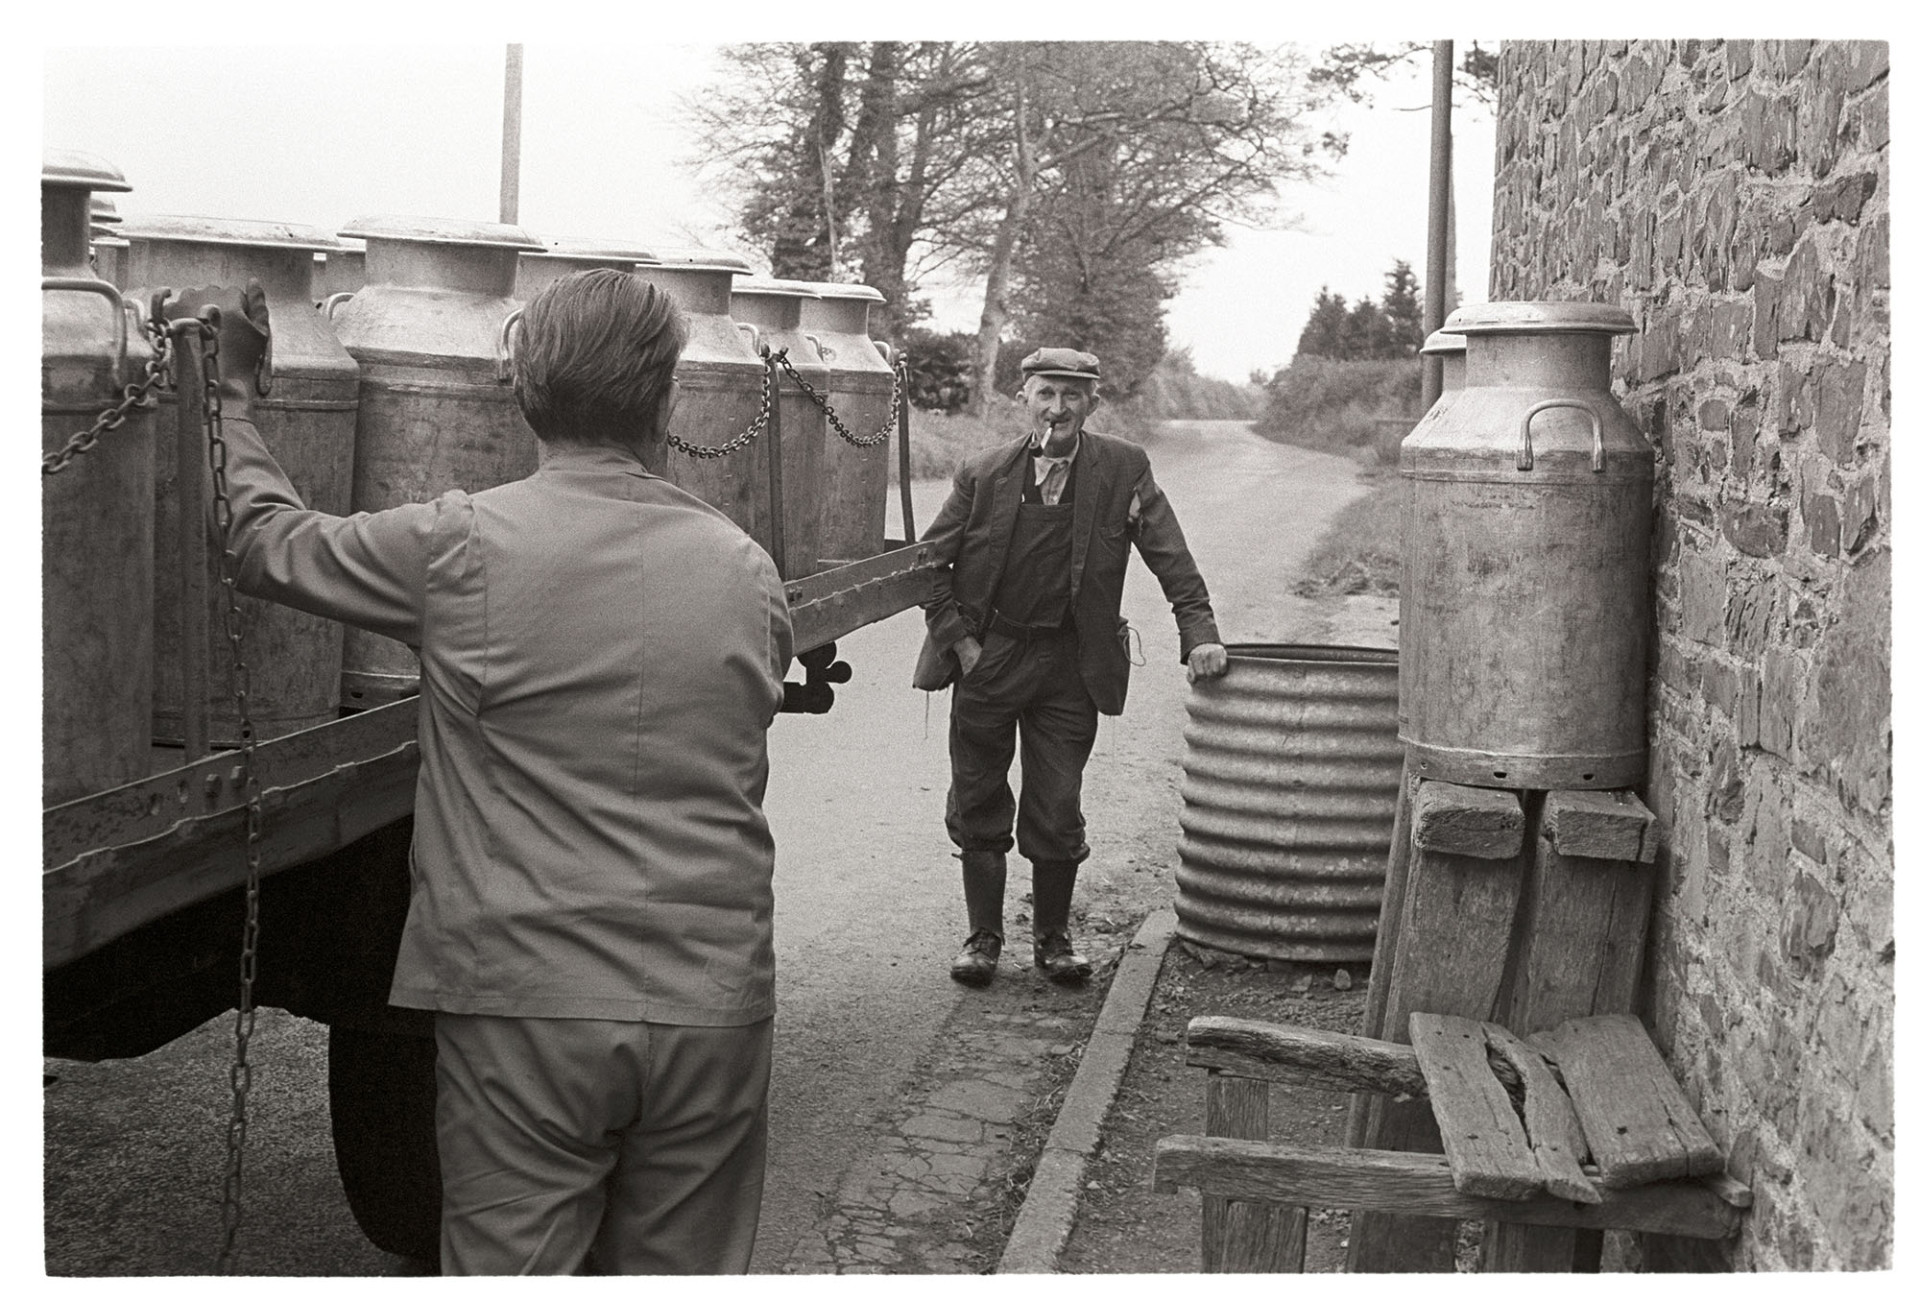 Milk lorry arriving to pick up milk churns, farmer chatting to driver. 
[Gordon Sanders smoking a pipe and talking to a milk lorry driver who has arrived to pick up milk churns at Reynards Park, Ashreigney.]